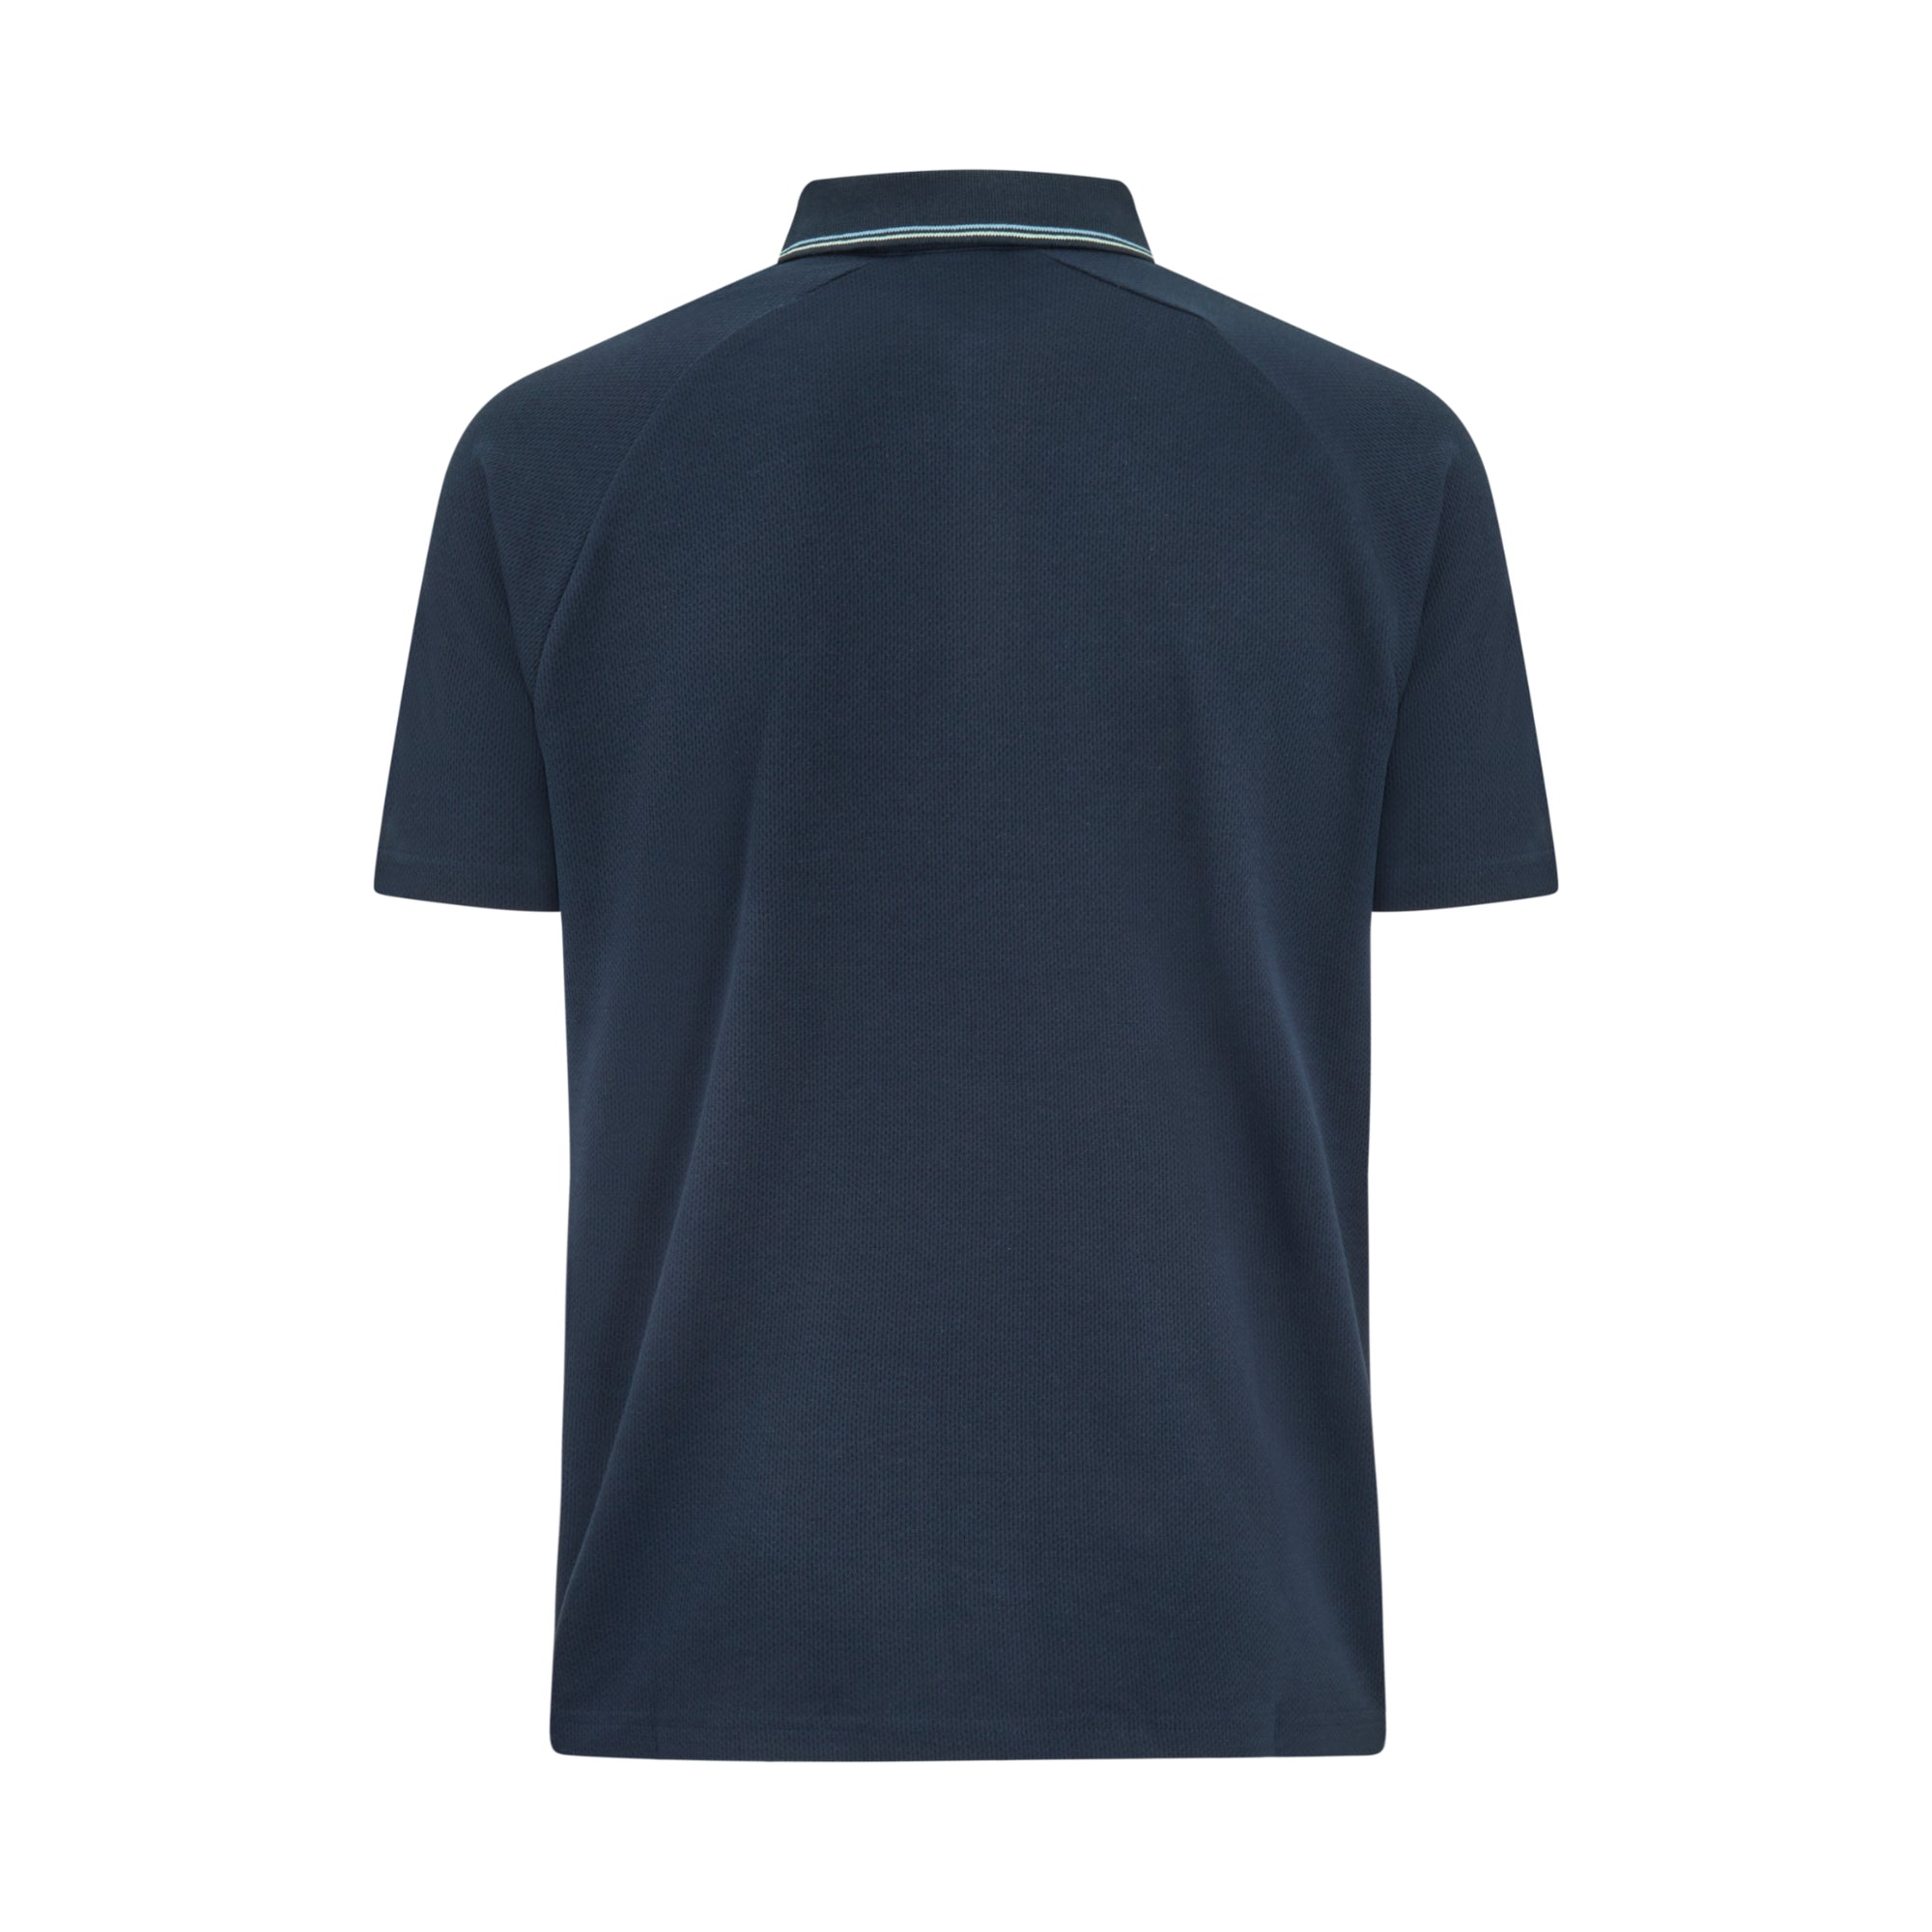 2023 Ryder Cup Men's Navy Polo Shirt - Front